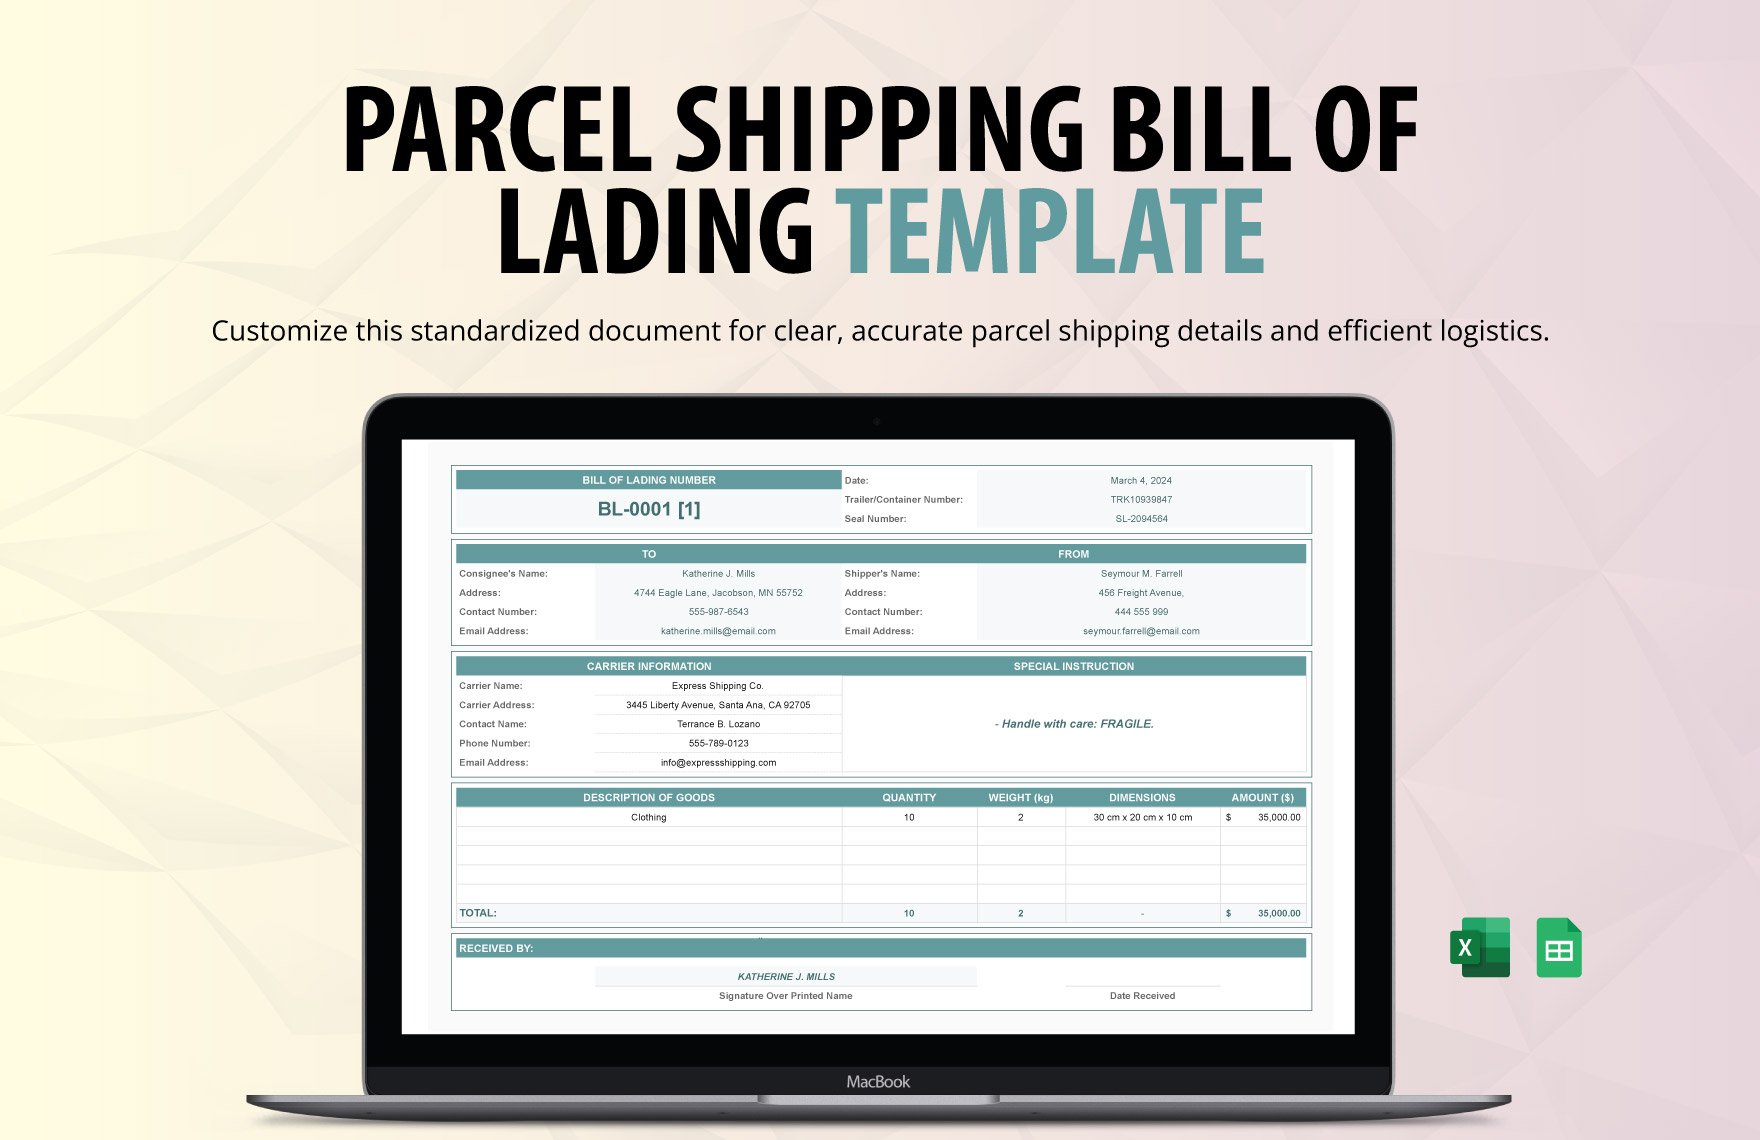 Parcel Shipping Bill of Lading Template